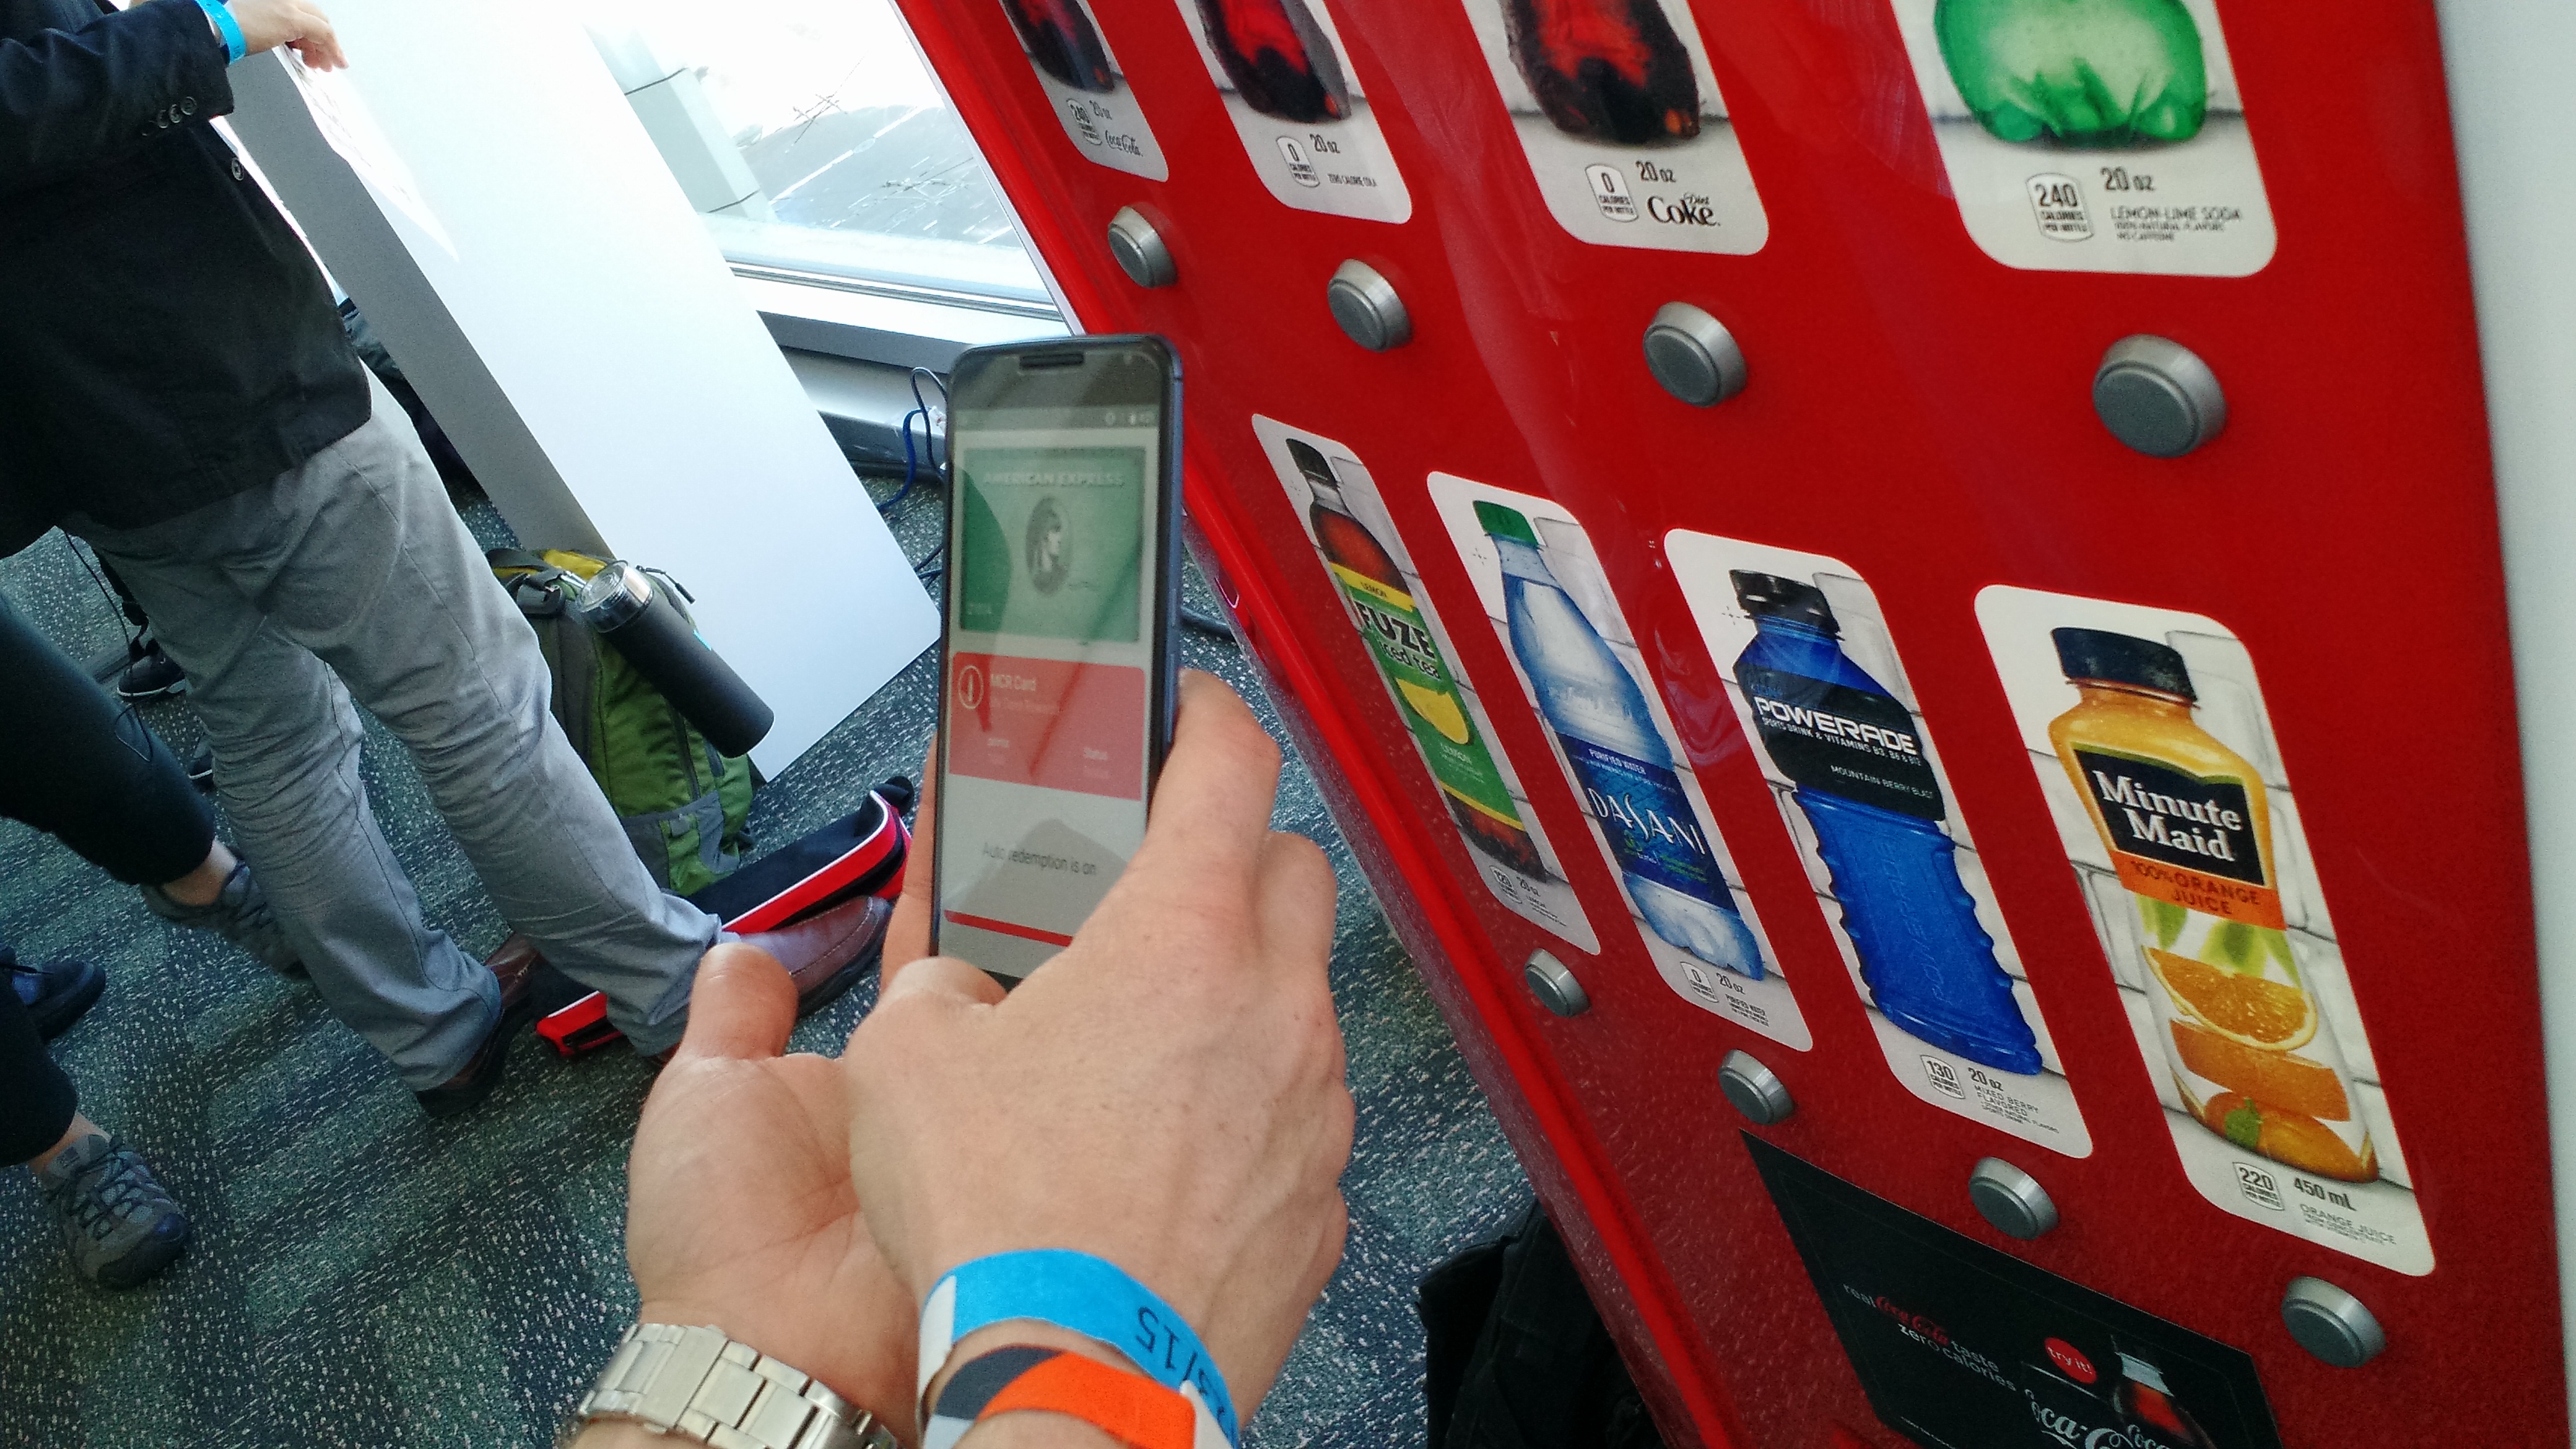 Android Pay being demonstrated on a Coke machine. It's using an American Express card and a Coca-Cola loyalty program.